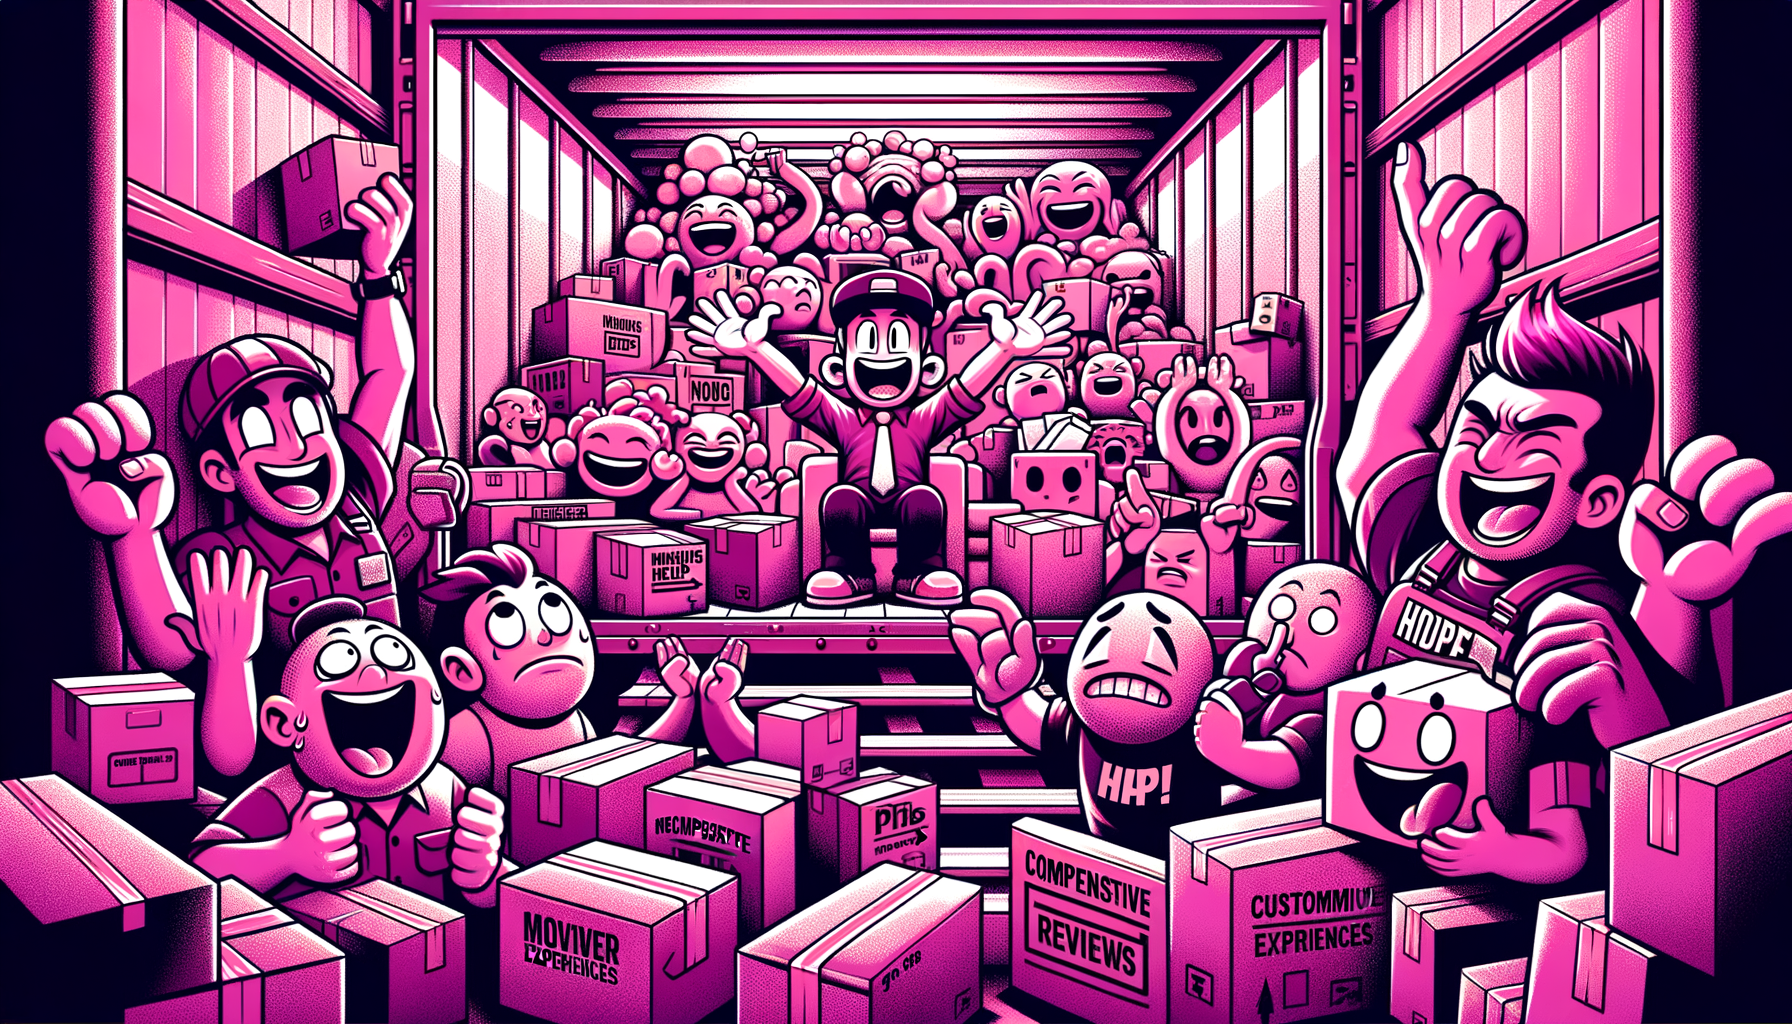 Cartoon-like illustration in fuschia tones featuring happy and puzzled characters within a moving truck and boxes, symbolizing diverse customer experiences with JK Moving Services.